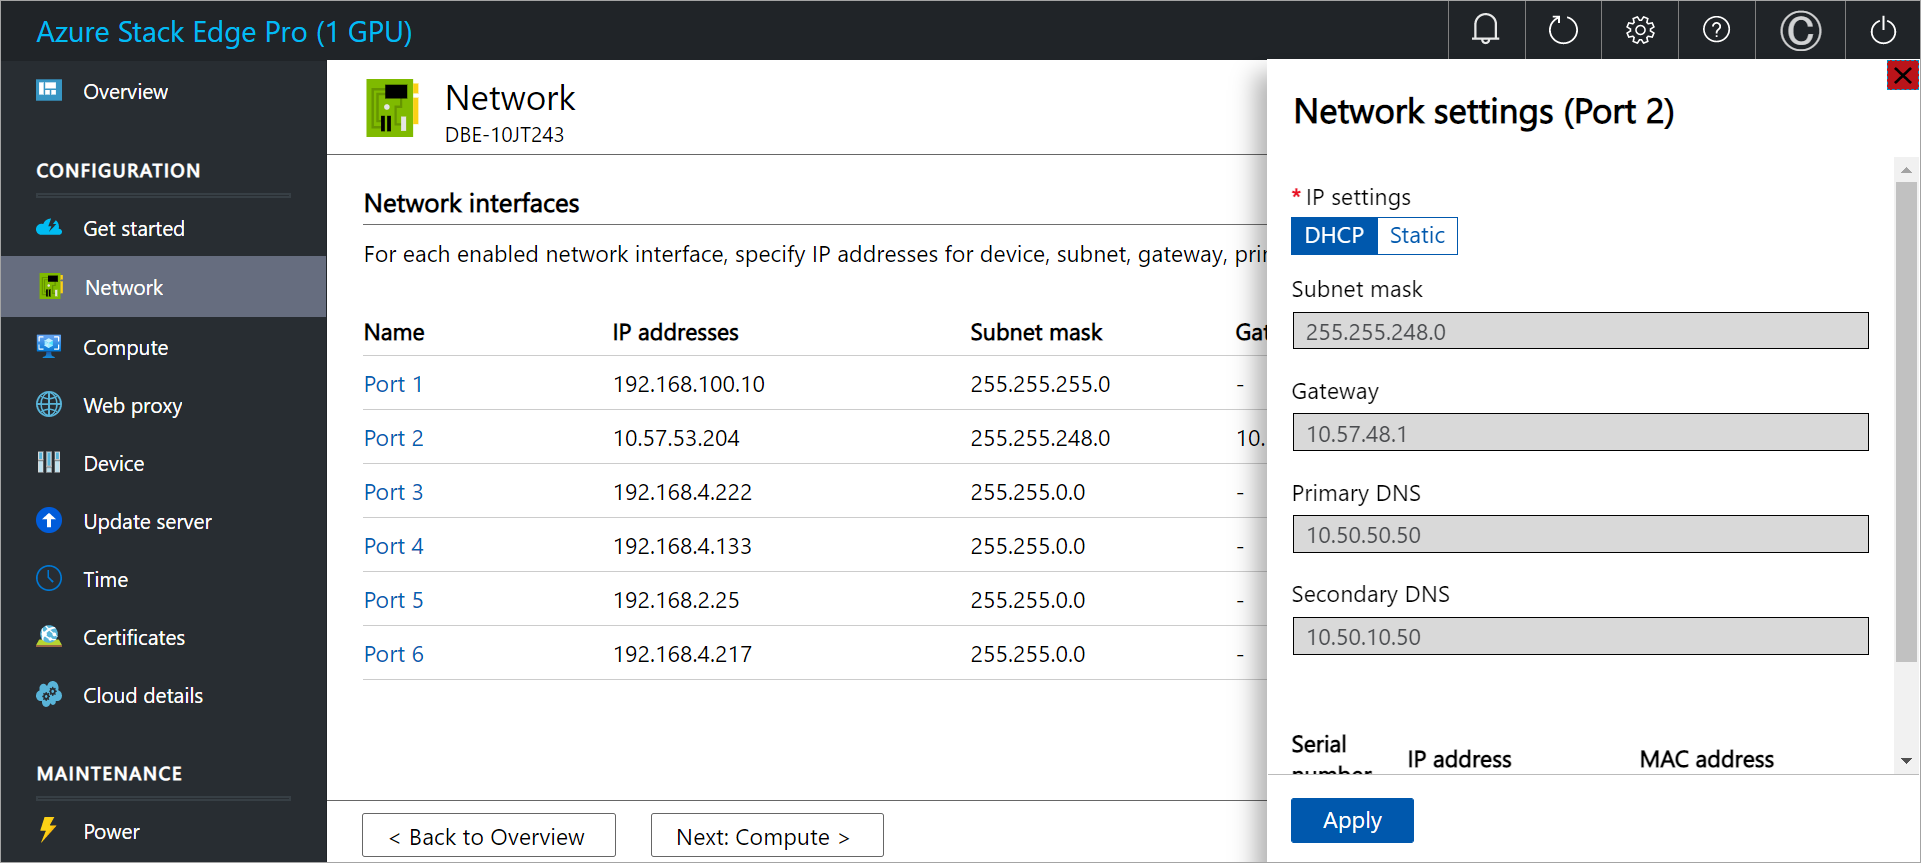 Screenshot of the Network page for an Azure Stack Edge device with Network settings for Port 2 displayed.